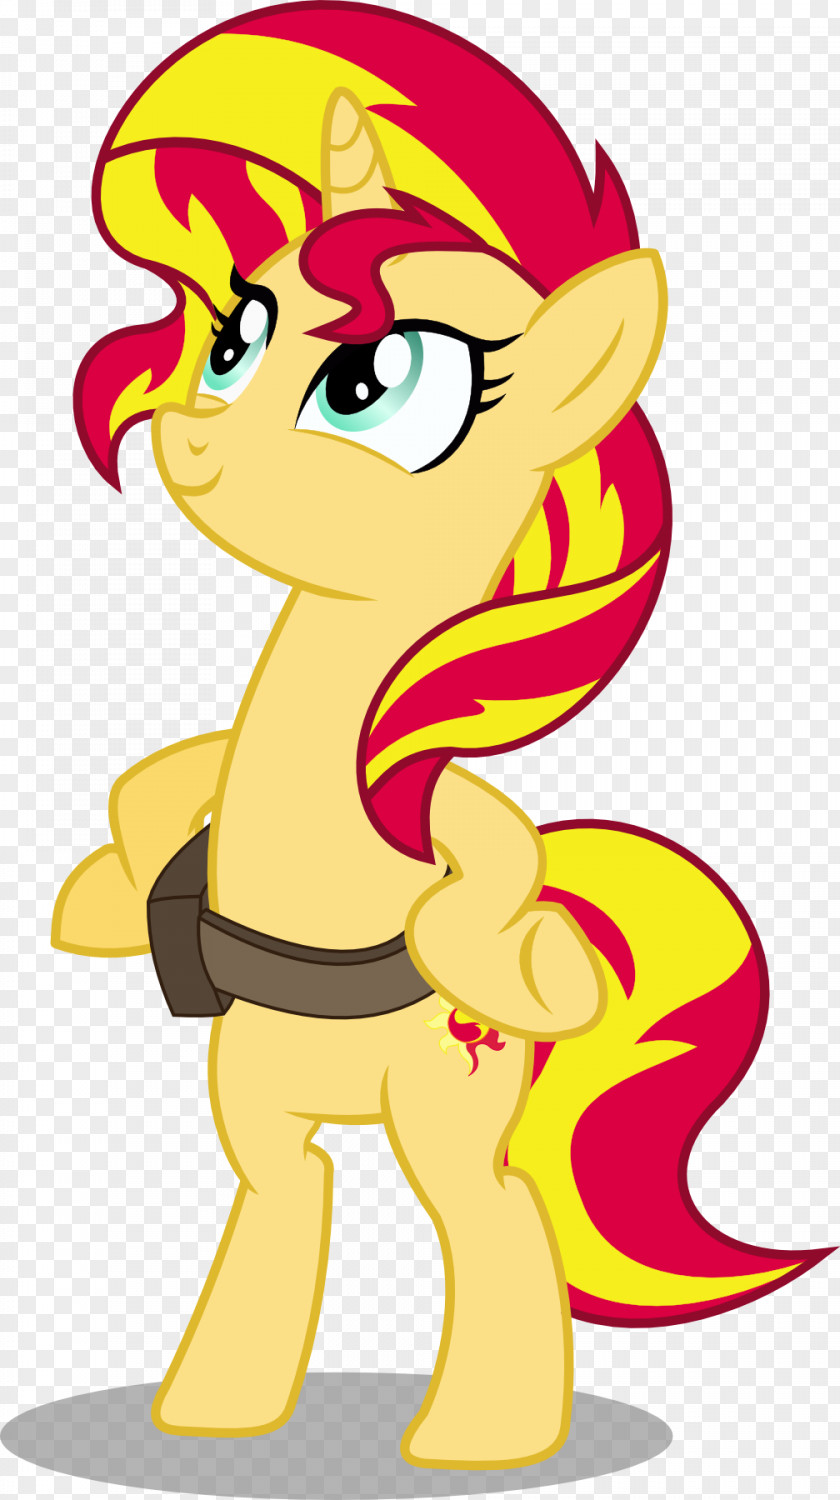 Shimmer Pony Sunset Rarity Pinkie Pie Flash Sentry PNG